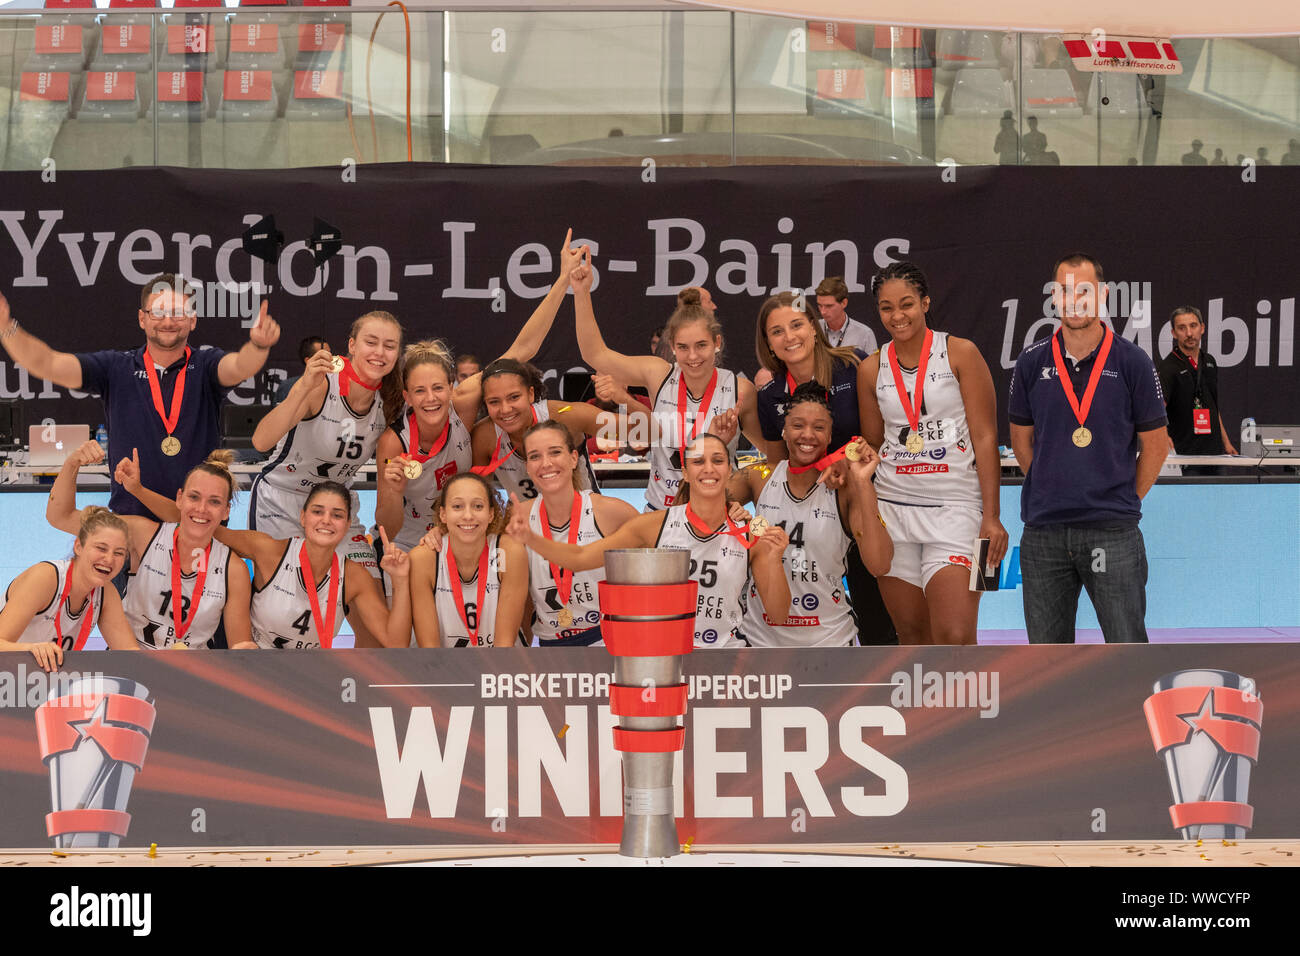 Yverdon Les Bains, Switzerland. 14th Sep, 2019. BCF ELFIC Fribourg Women's  Basketball Team Savoring Their Victory During the Awards Ceremony at the  Super Cup 2019 at the Yverdon-les-Bains Sports Center (Switzerland) (Photo